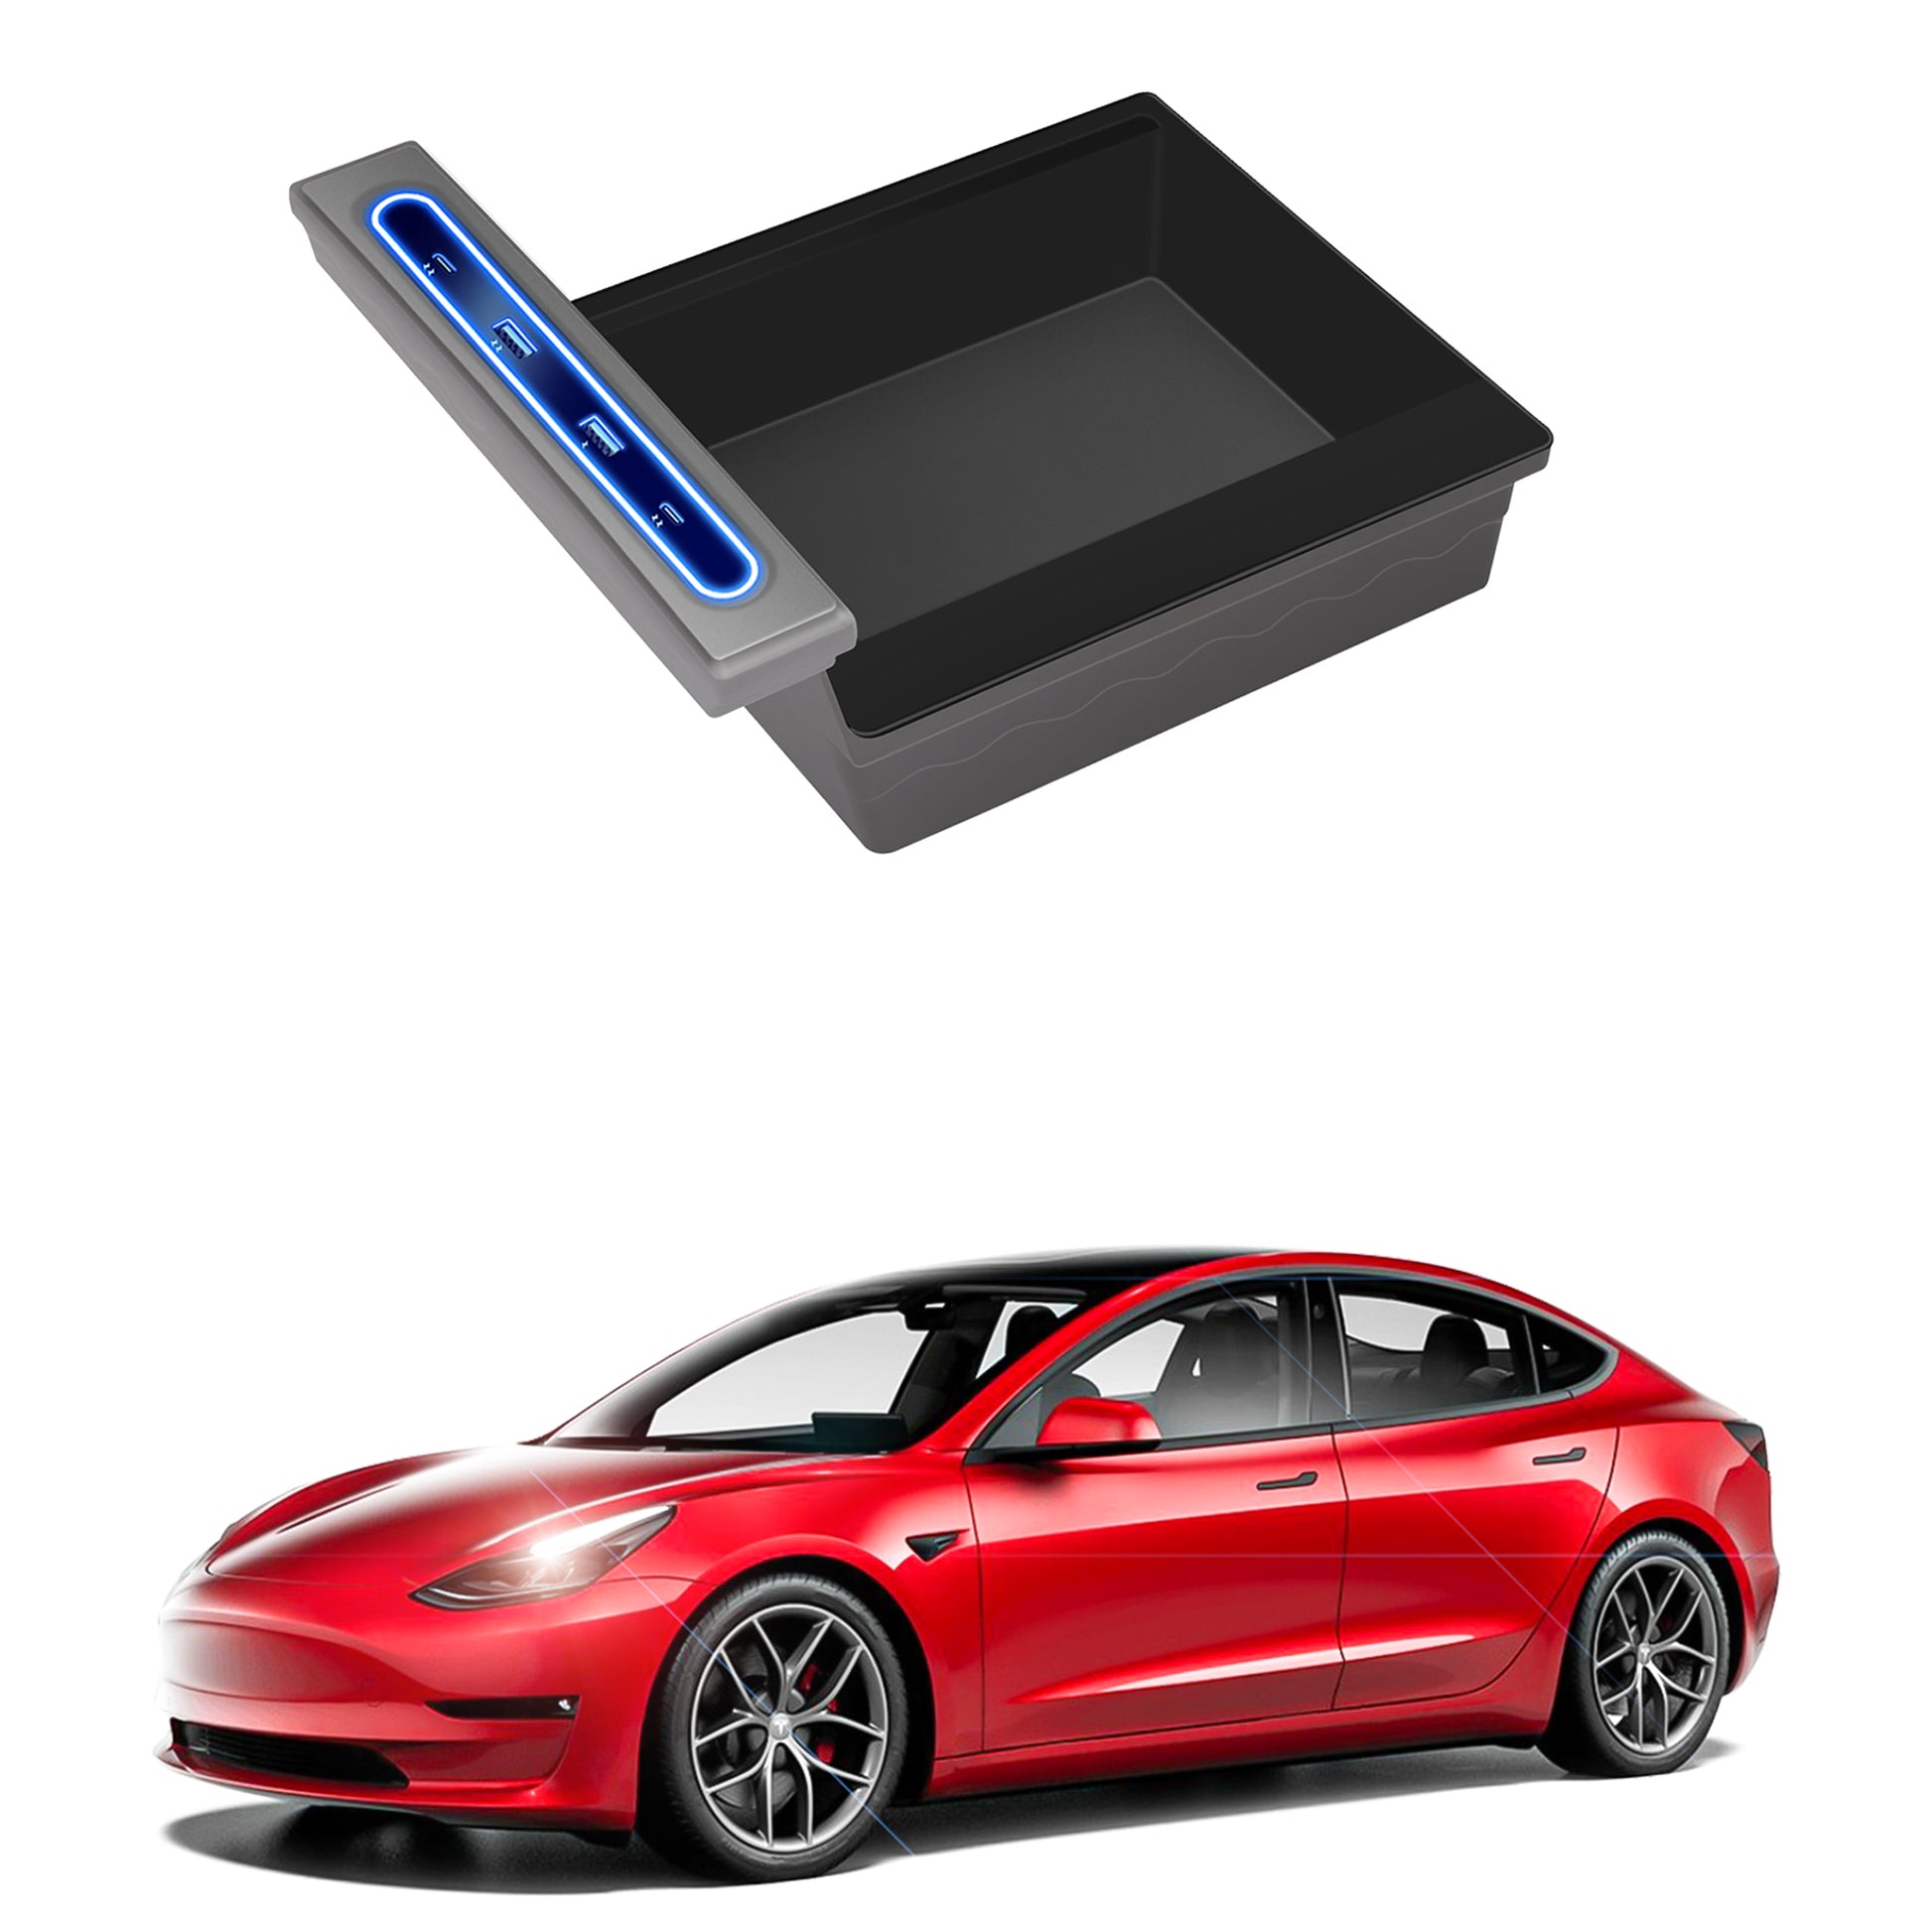 tesla model 3 Y car 2022 2023 2021 2020 2019 2018 s3xy  USB HUB with Center Console Organizer Set arcoche accessories accessory aftermarket price Vehicles standard long range performance sr+ electric car rwd ev interior exterior diy decoration price elon musk must have black white red blue 5 7 seats seat